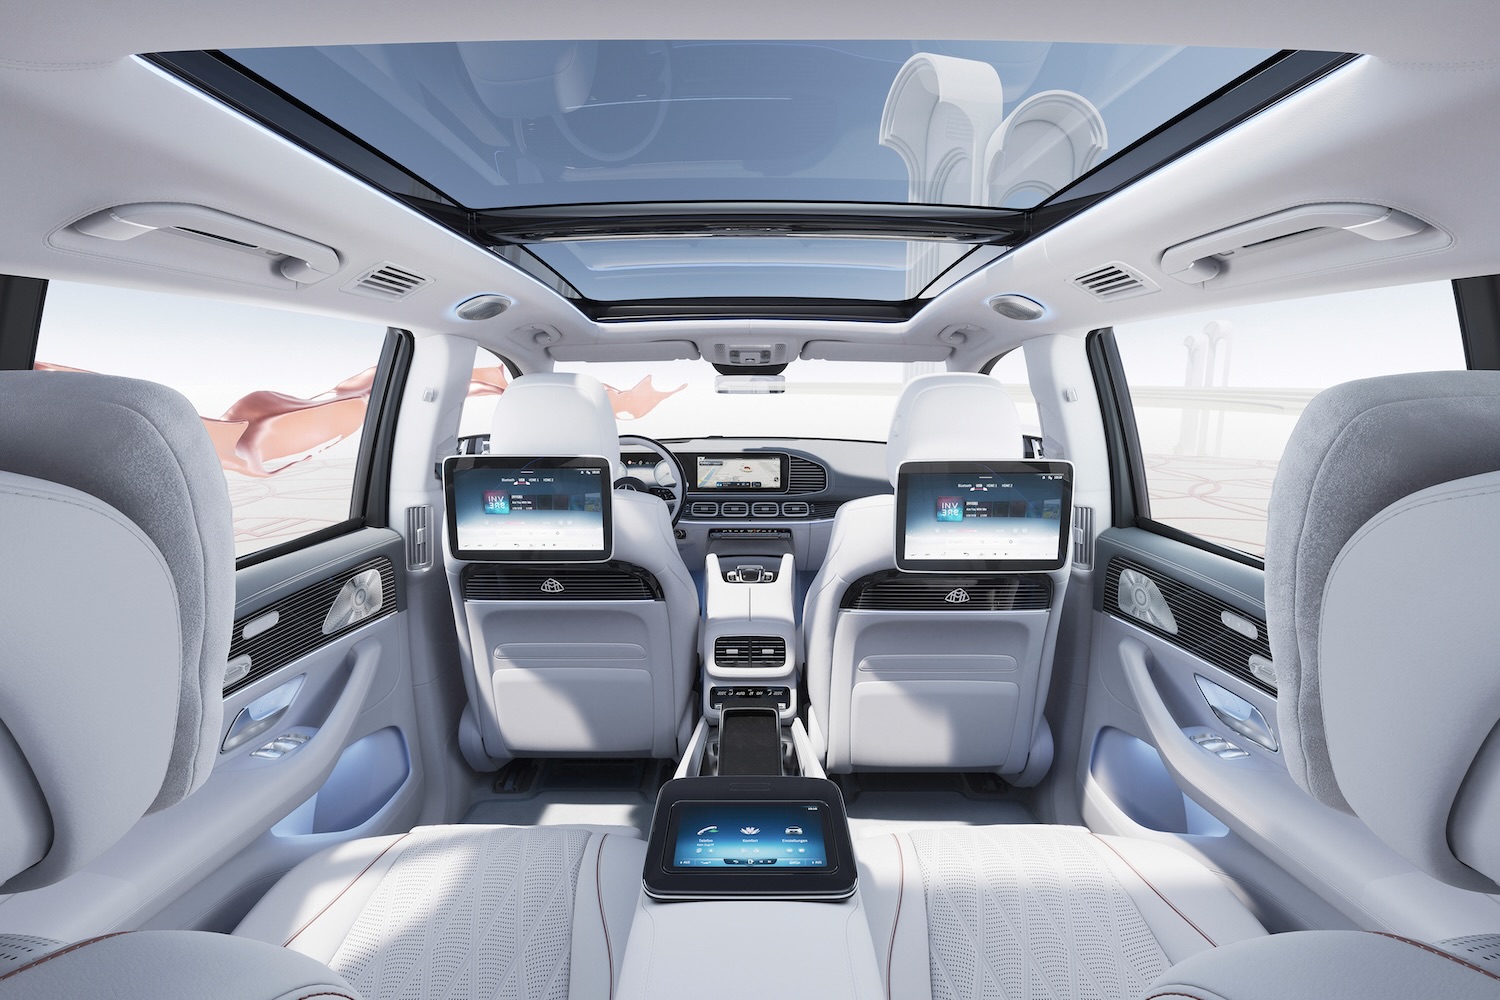 Interior of the 2024 Mercedes-Benz GLS Maybach 600 from the rear seats.